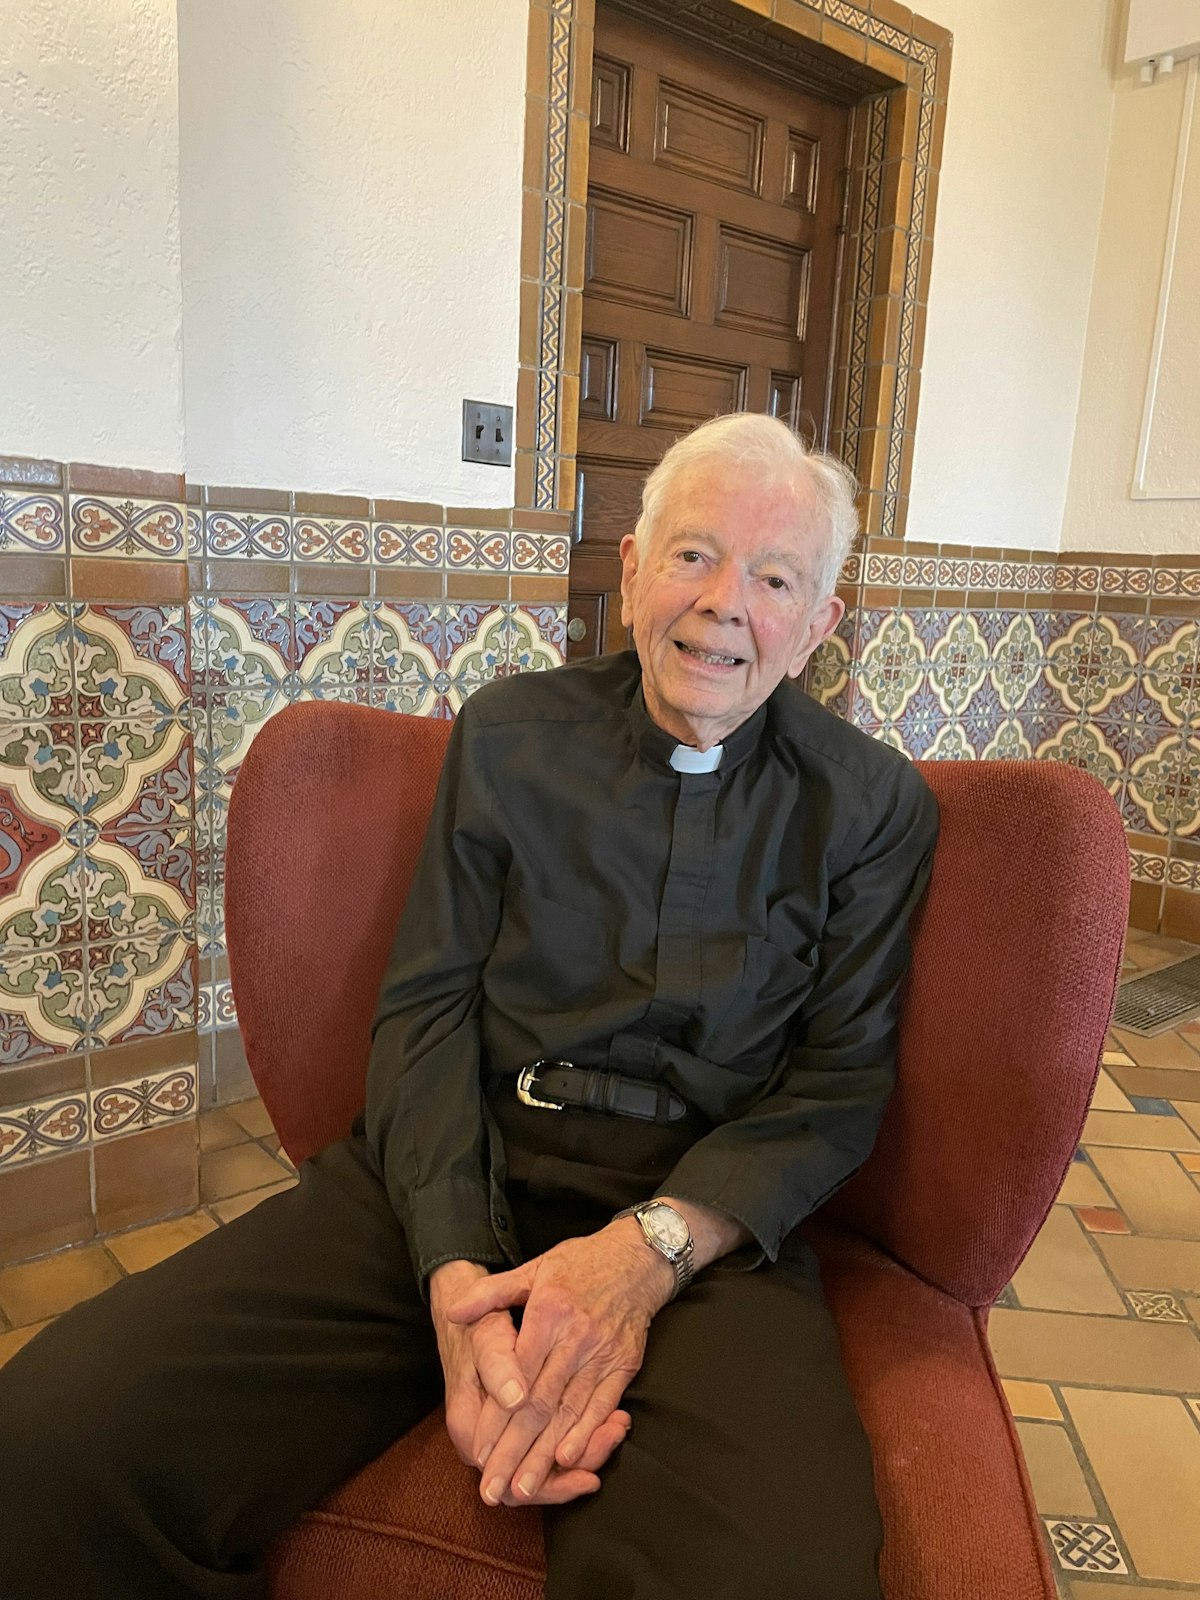 At age 90, Fr. Cavanagh plans to retire from teaching next year, but he hopes to stay involved in the university, he said. One of his greatest joys is hearing from former students and coworkers who have been able to apply his classroom principles in the real world, he said. (Jim Dudley | Special to Detroit Catholic)